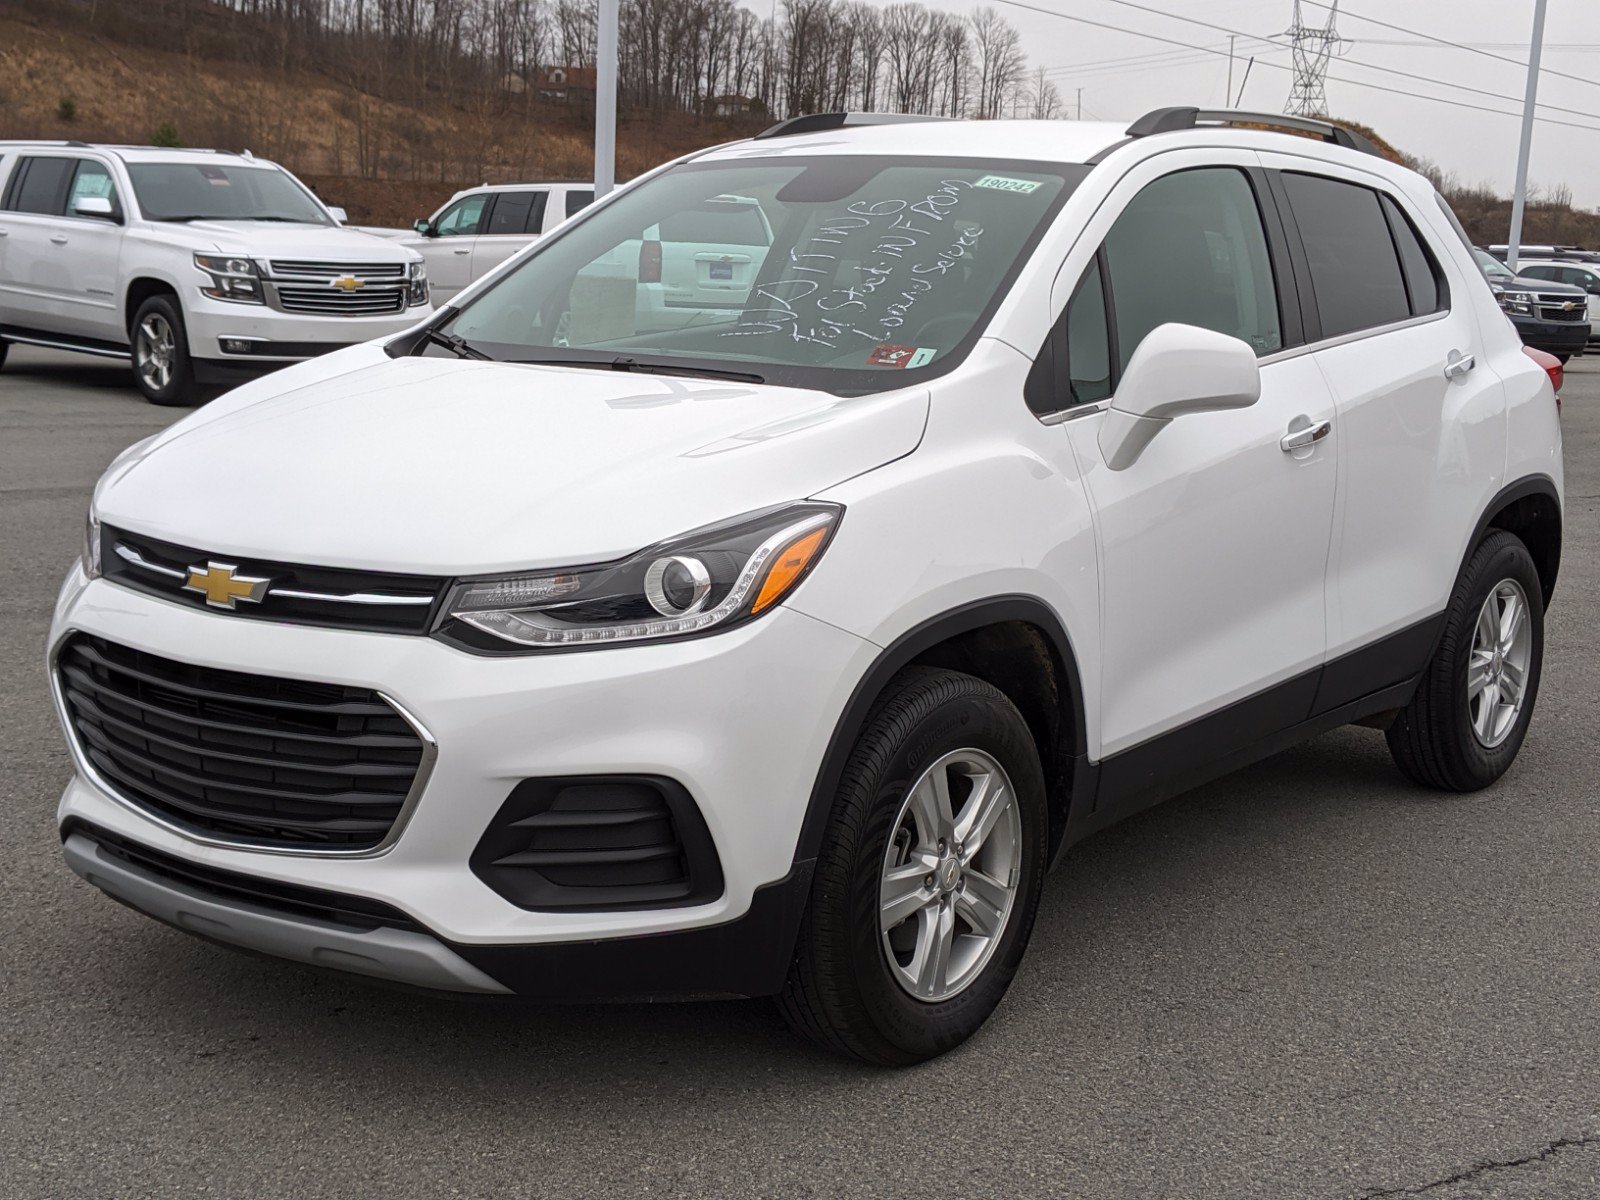 2019 chevy trax screen not working